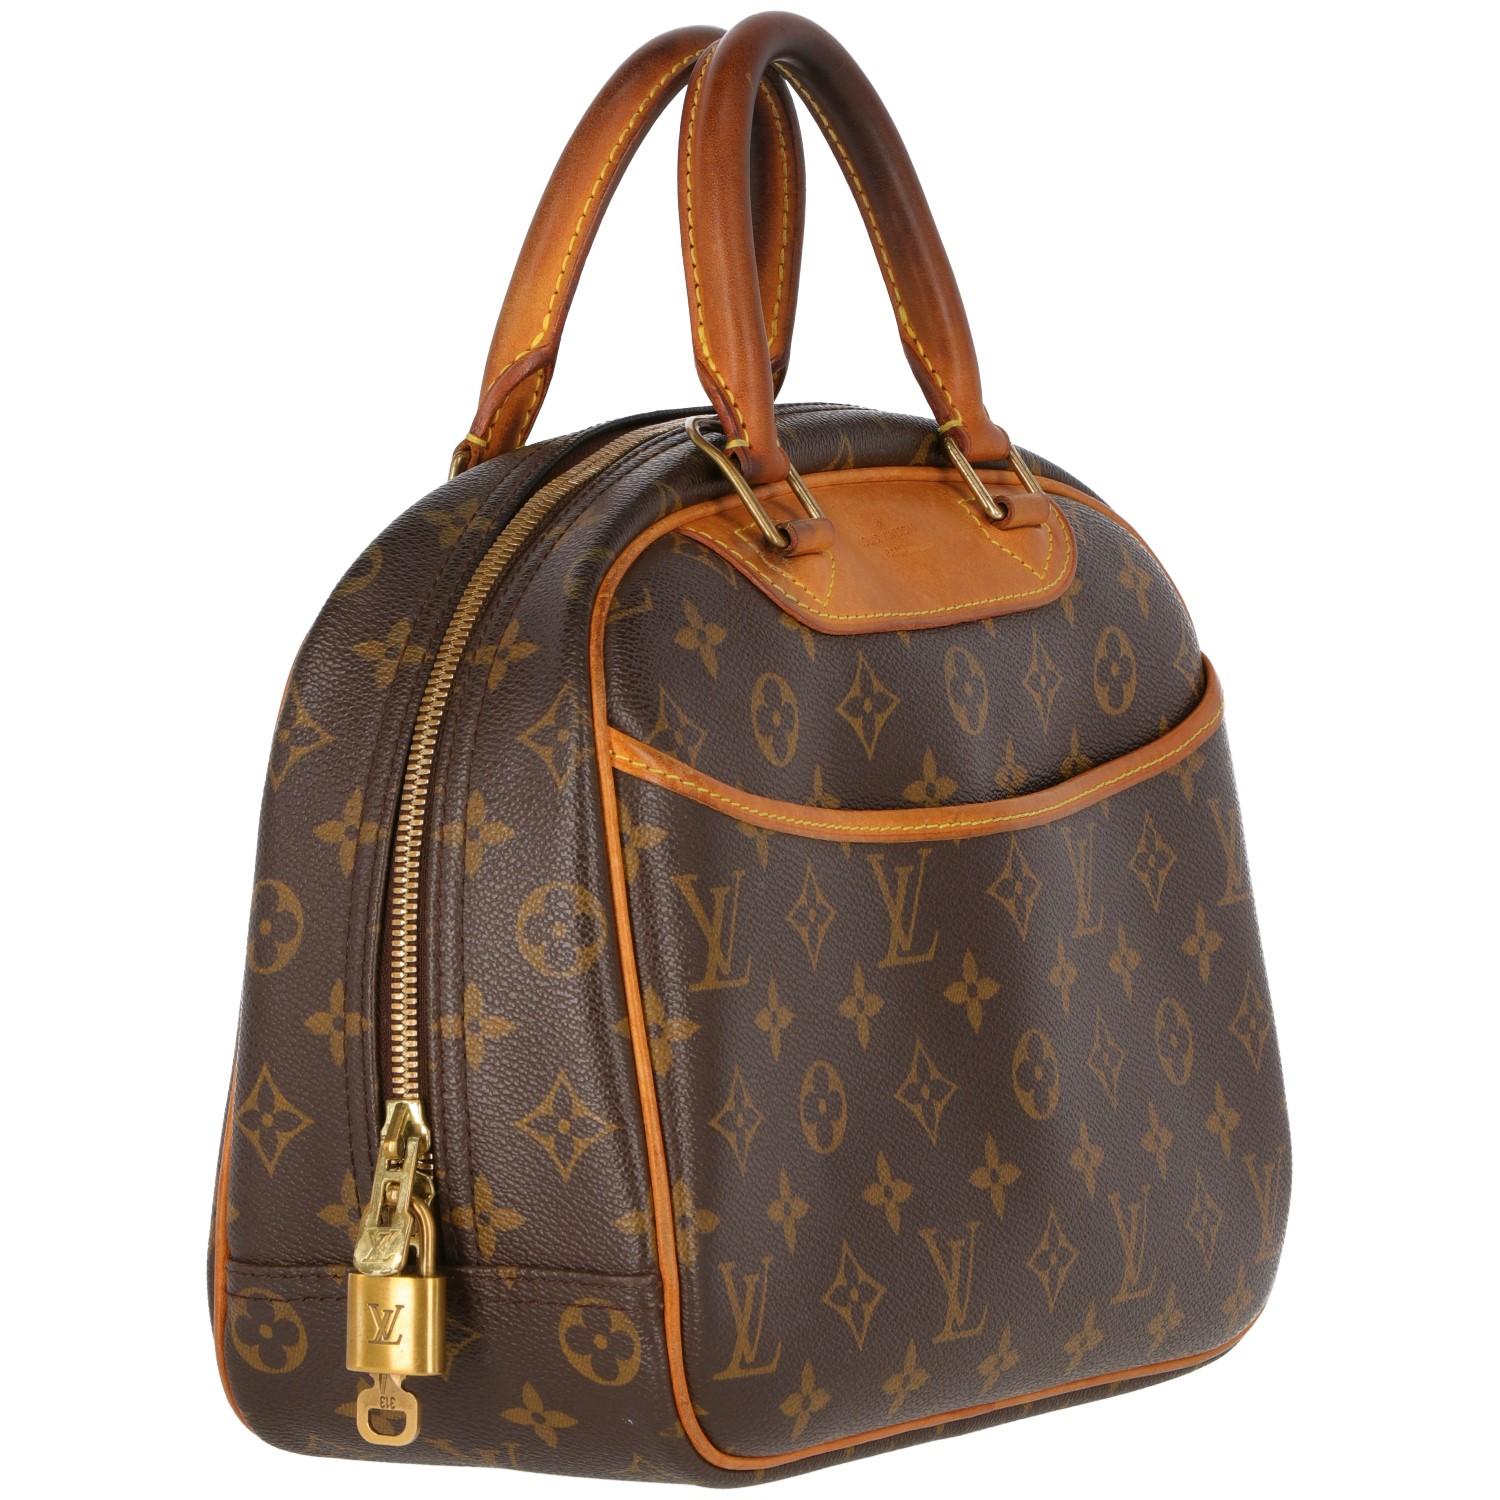 The Louis Vuitton Deauville bag is made in France, from 2008 Vuitton collection. Canvas branded monogram logo, with leather handles ad adjustable shoulder strap. The padlock and keys are authentic and in golden-tone like as the zip fastening.   
The